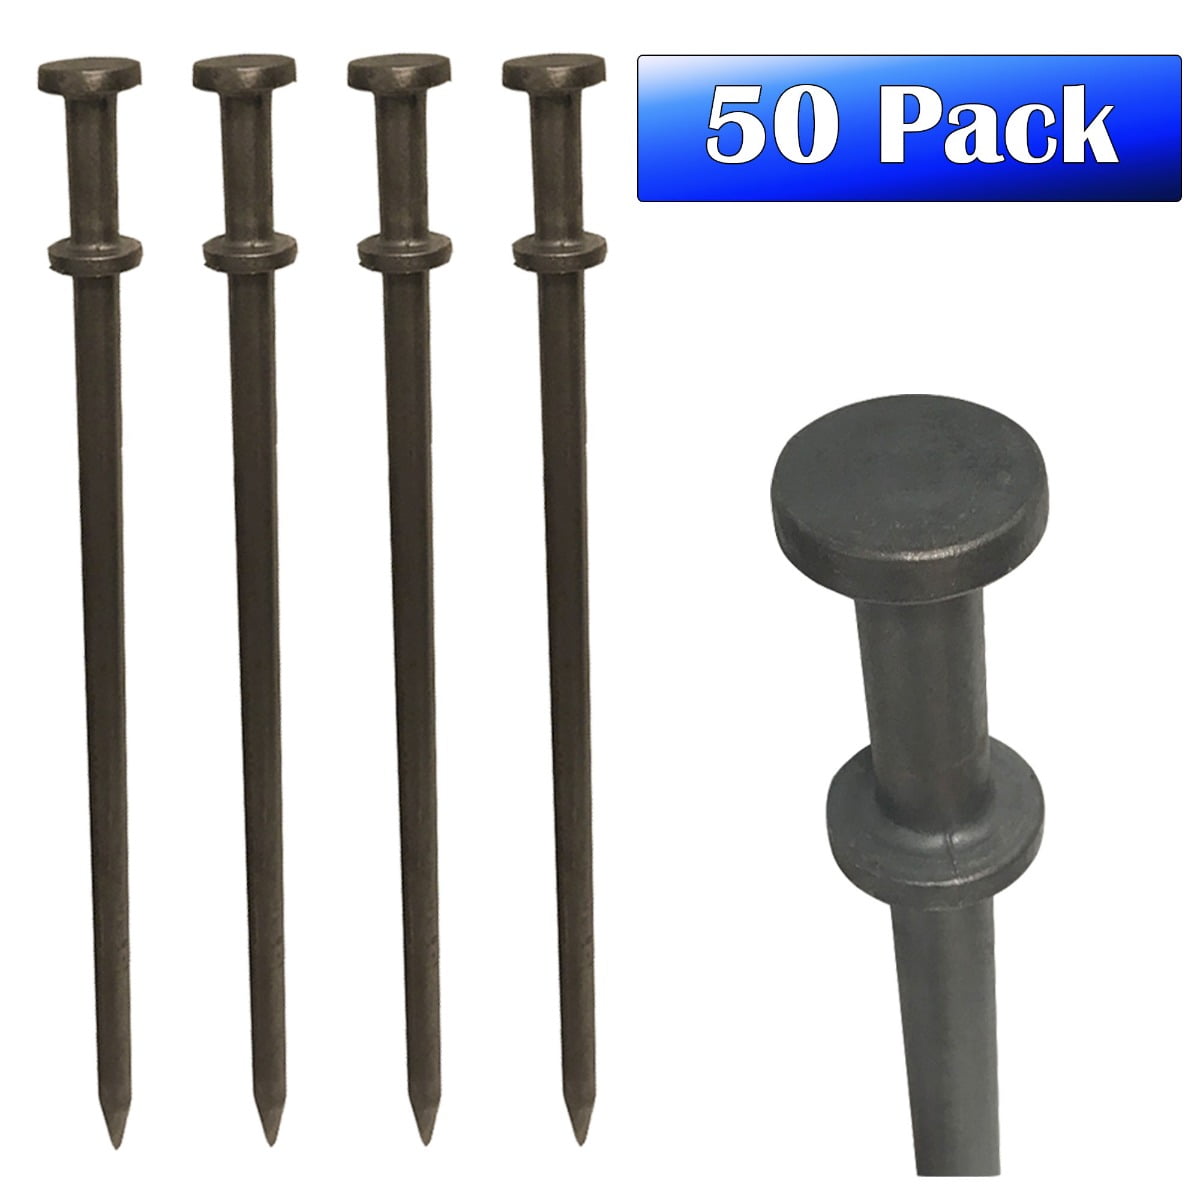 Large 10" Galvanized Steel Tent Peg Stake Nail  with Orange Stopper 50 Pack 